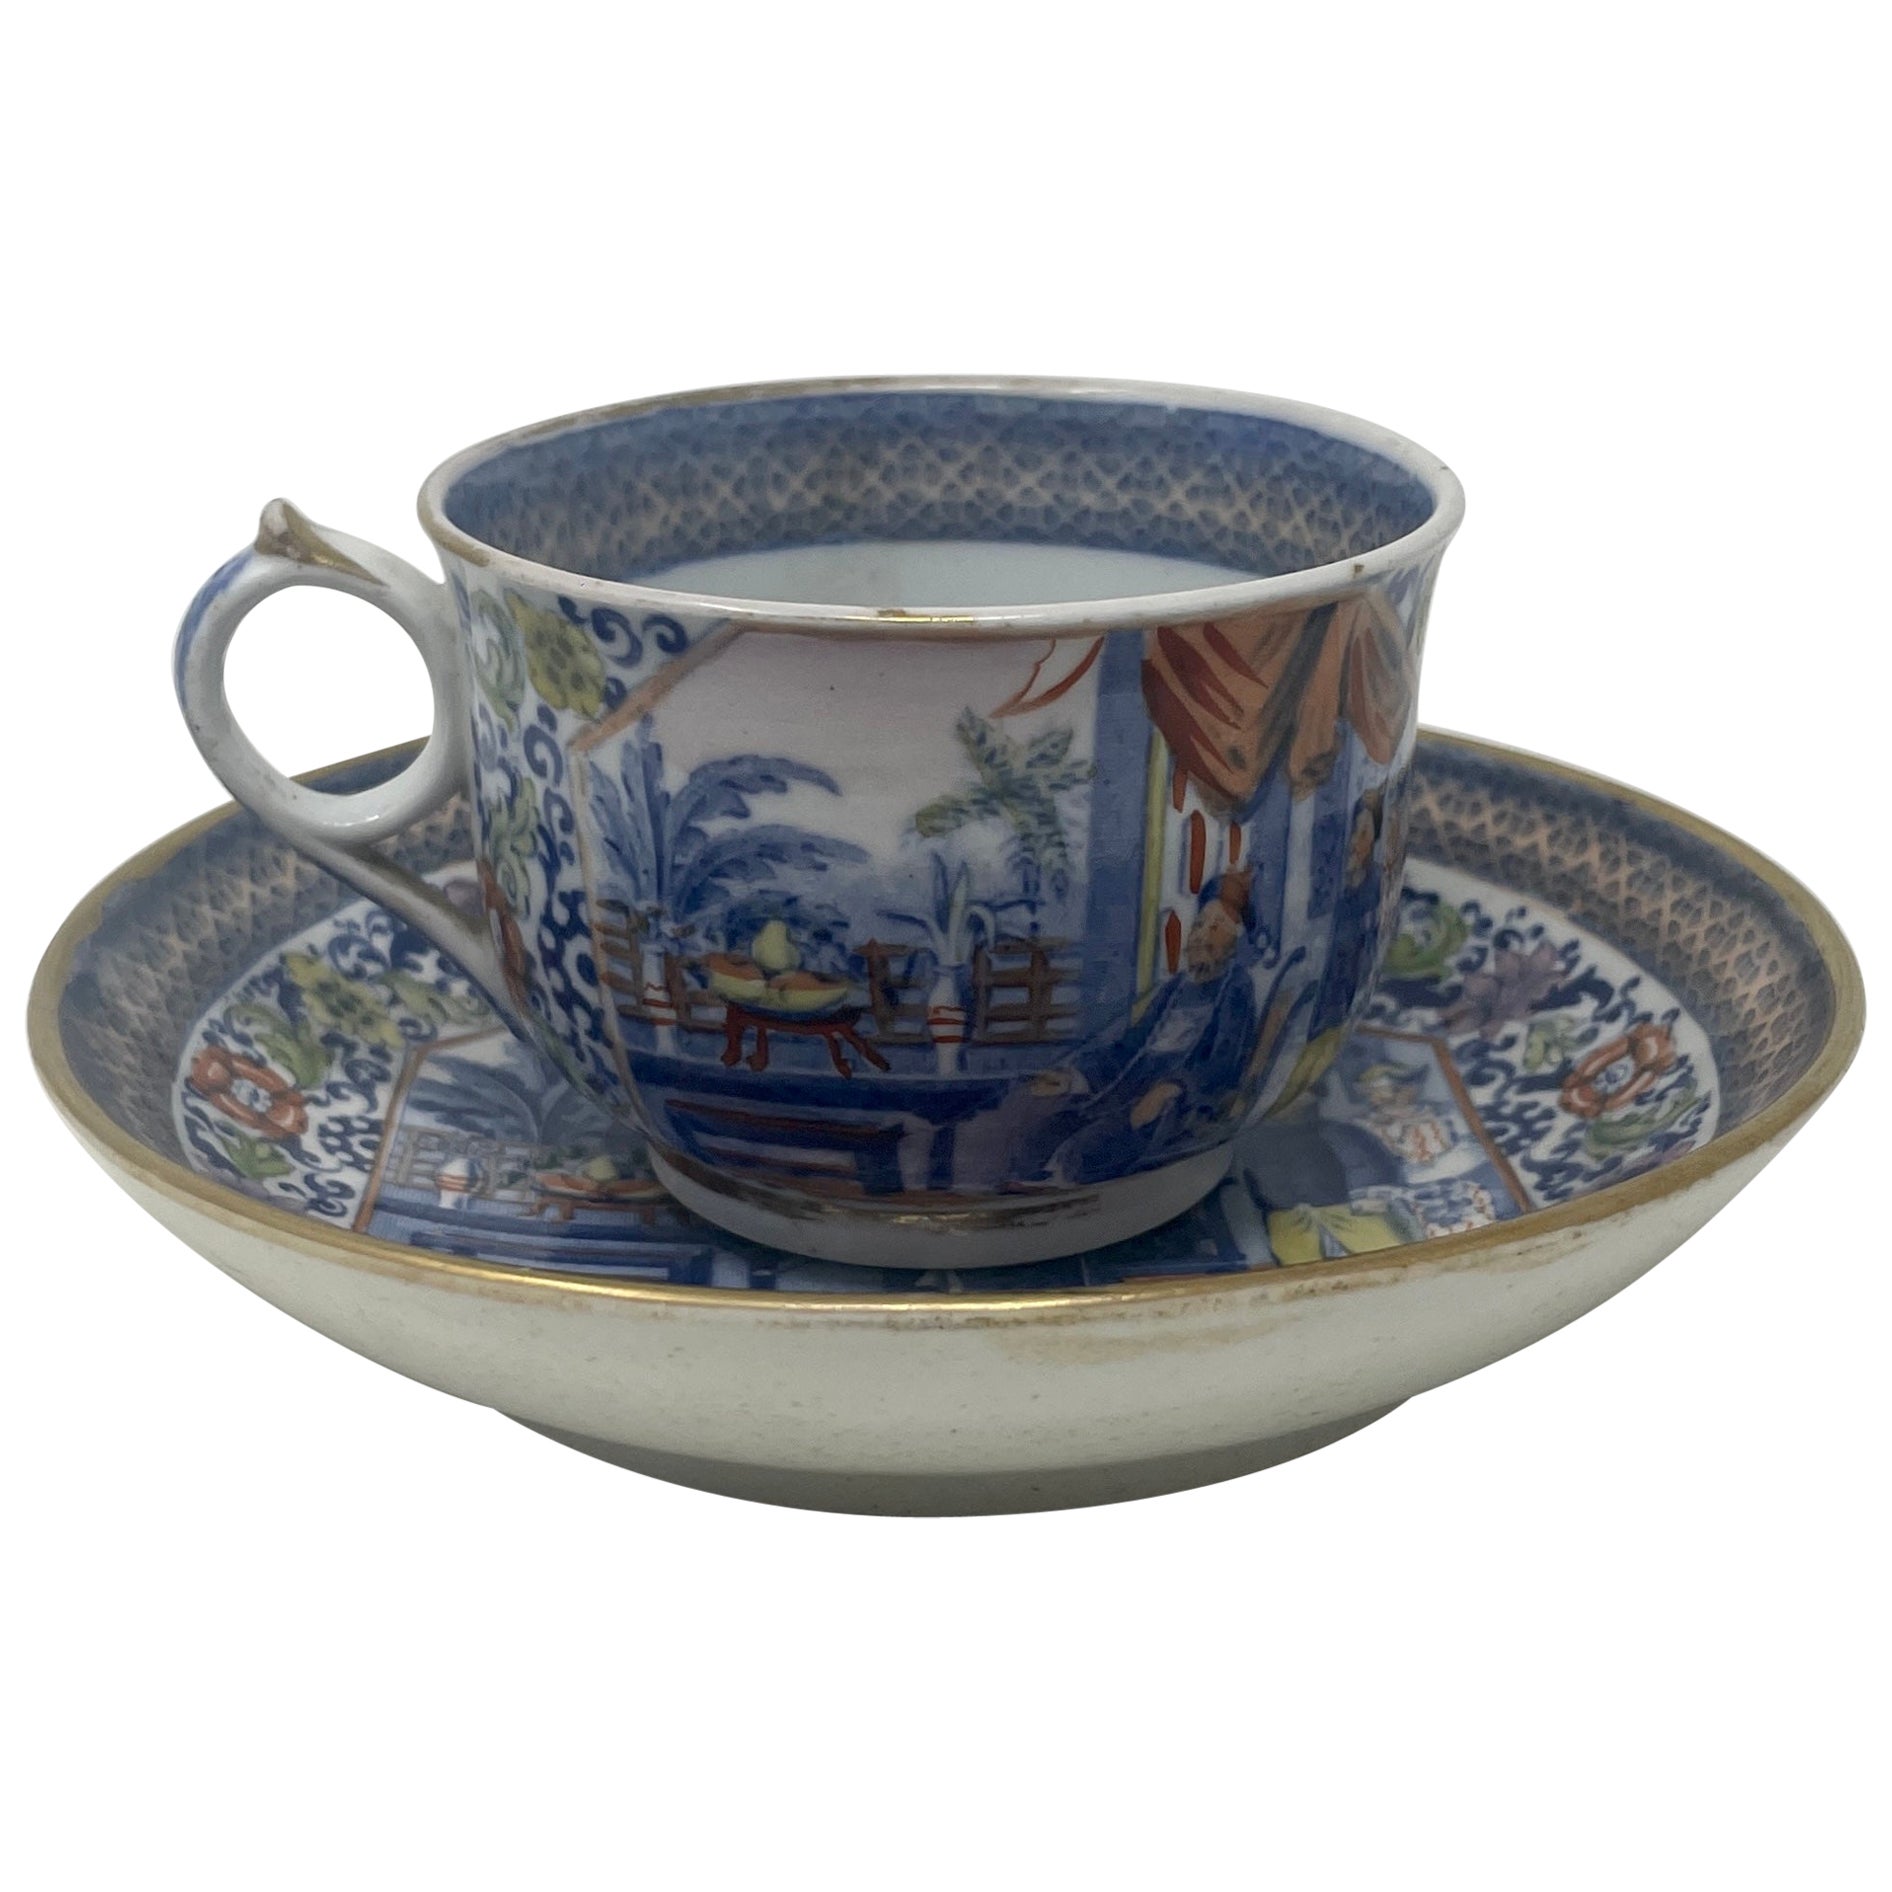 Antique Chinese Cup & Saucer, circa 1840